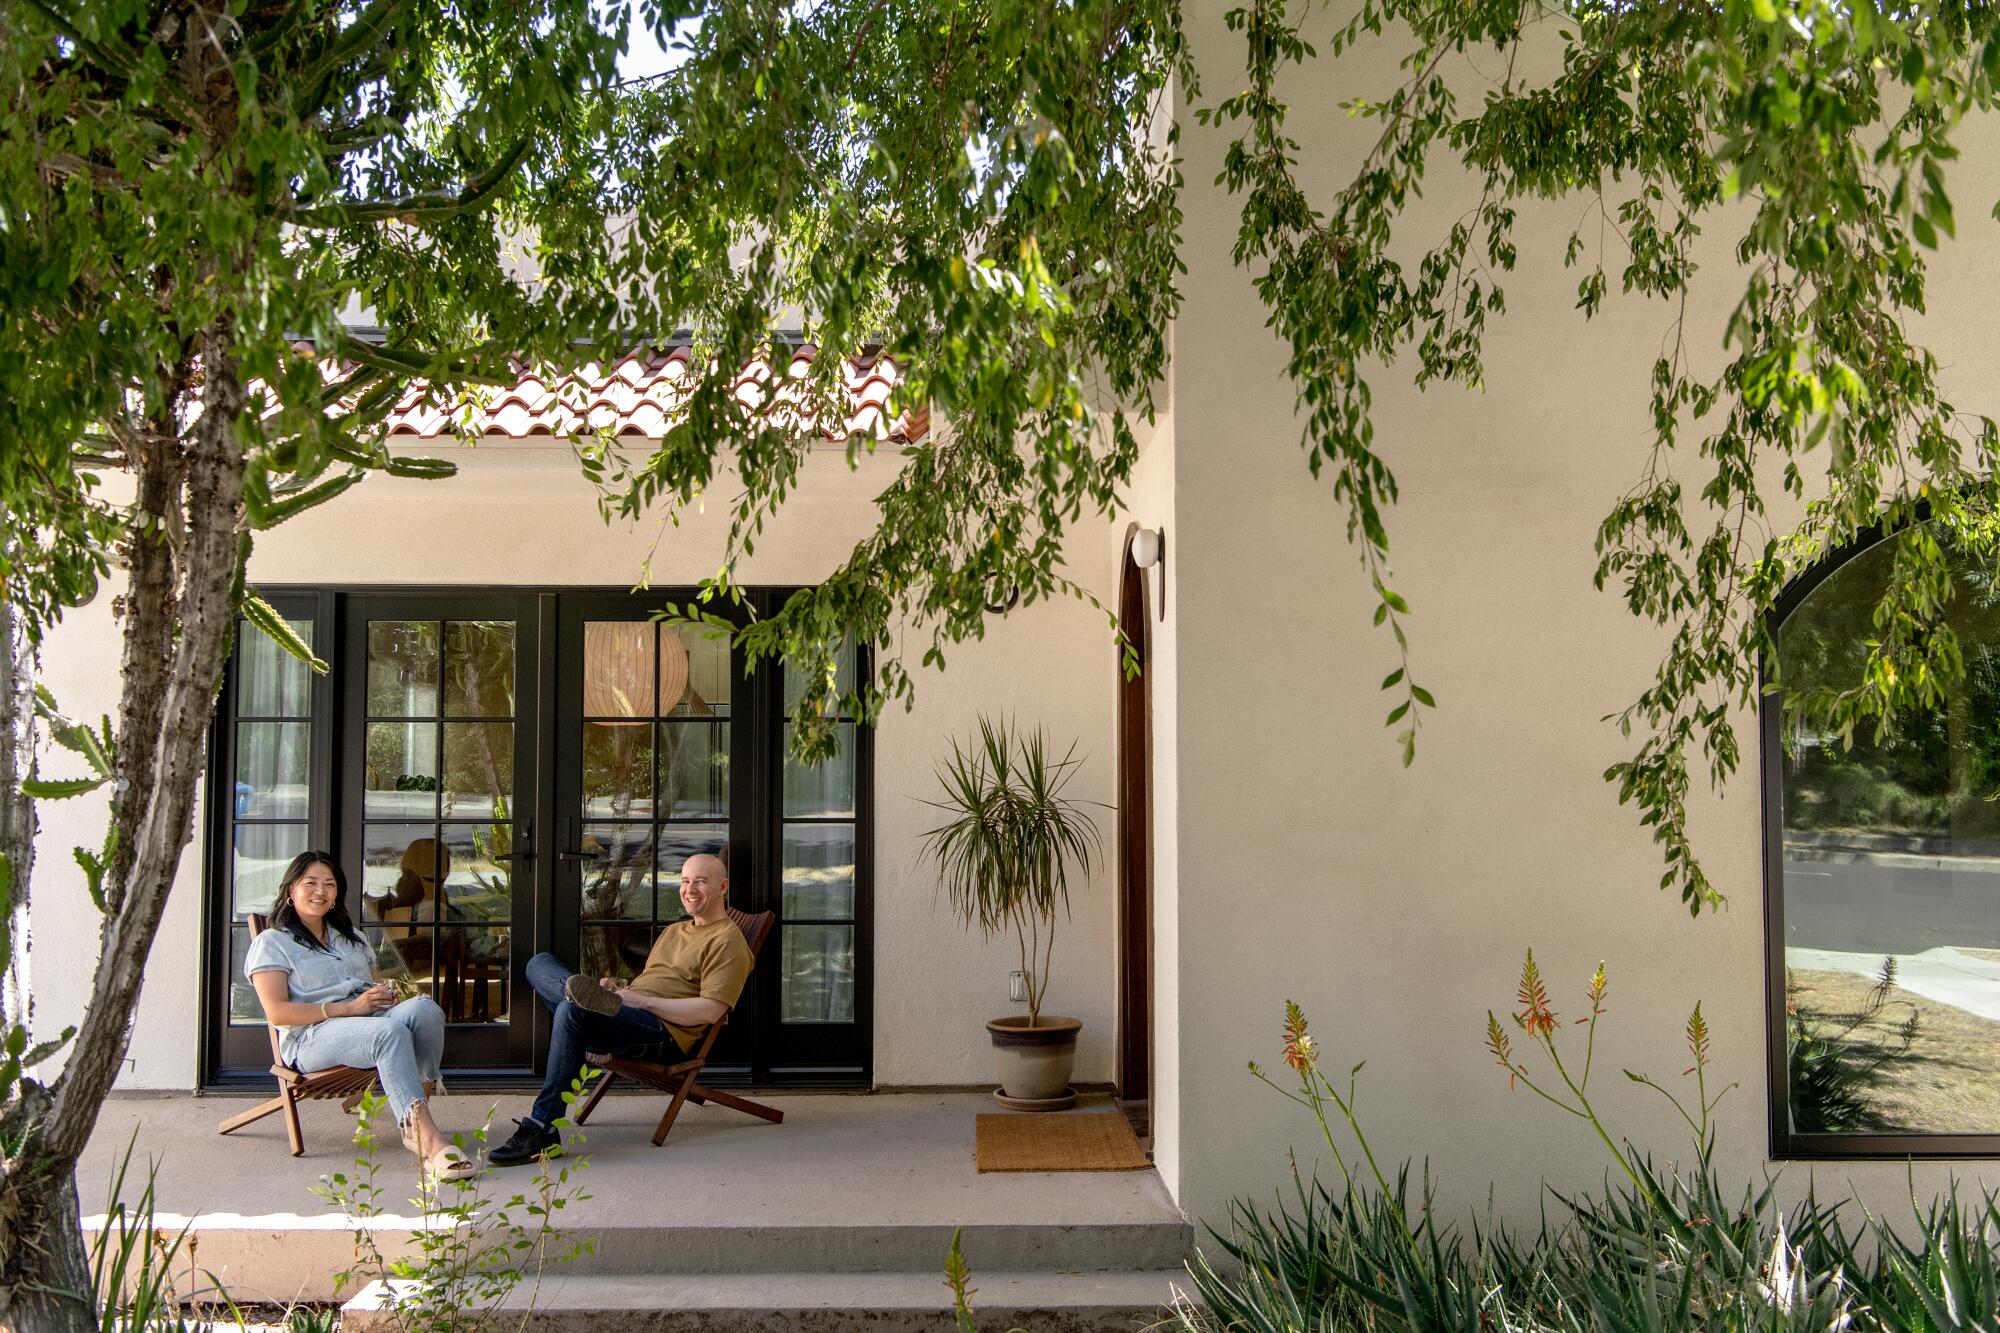 Jing Guo and Gabriel Taylor Russ sit on a patio outside their Spanish bungalow